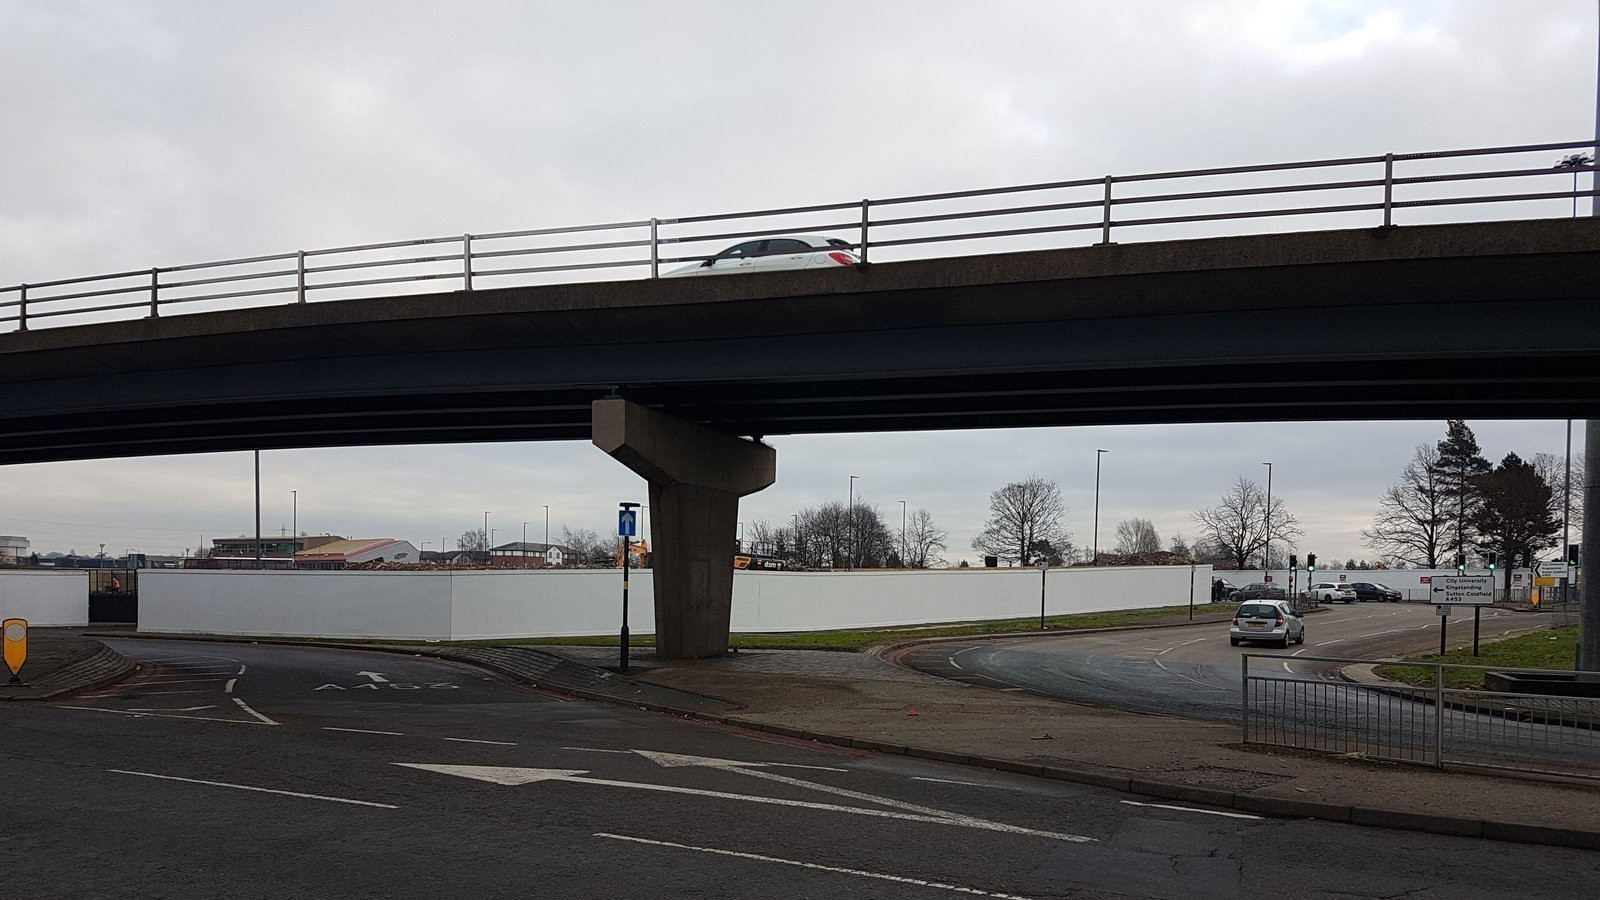 Birmingham City Council say the report highlights their reasons for demolishing the Perry Barr Flyover ©Change.org